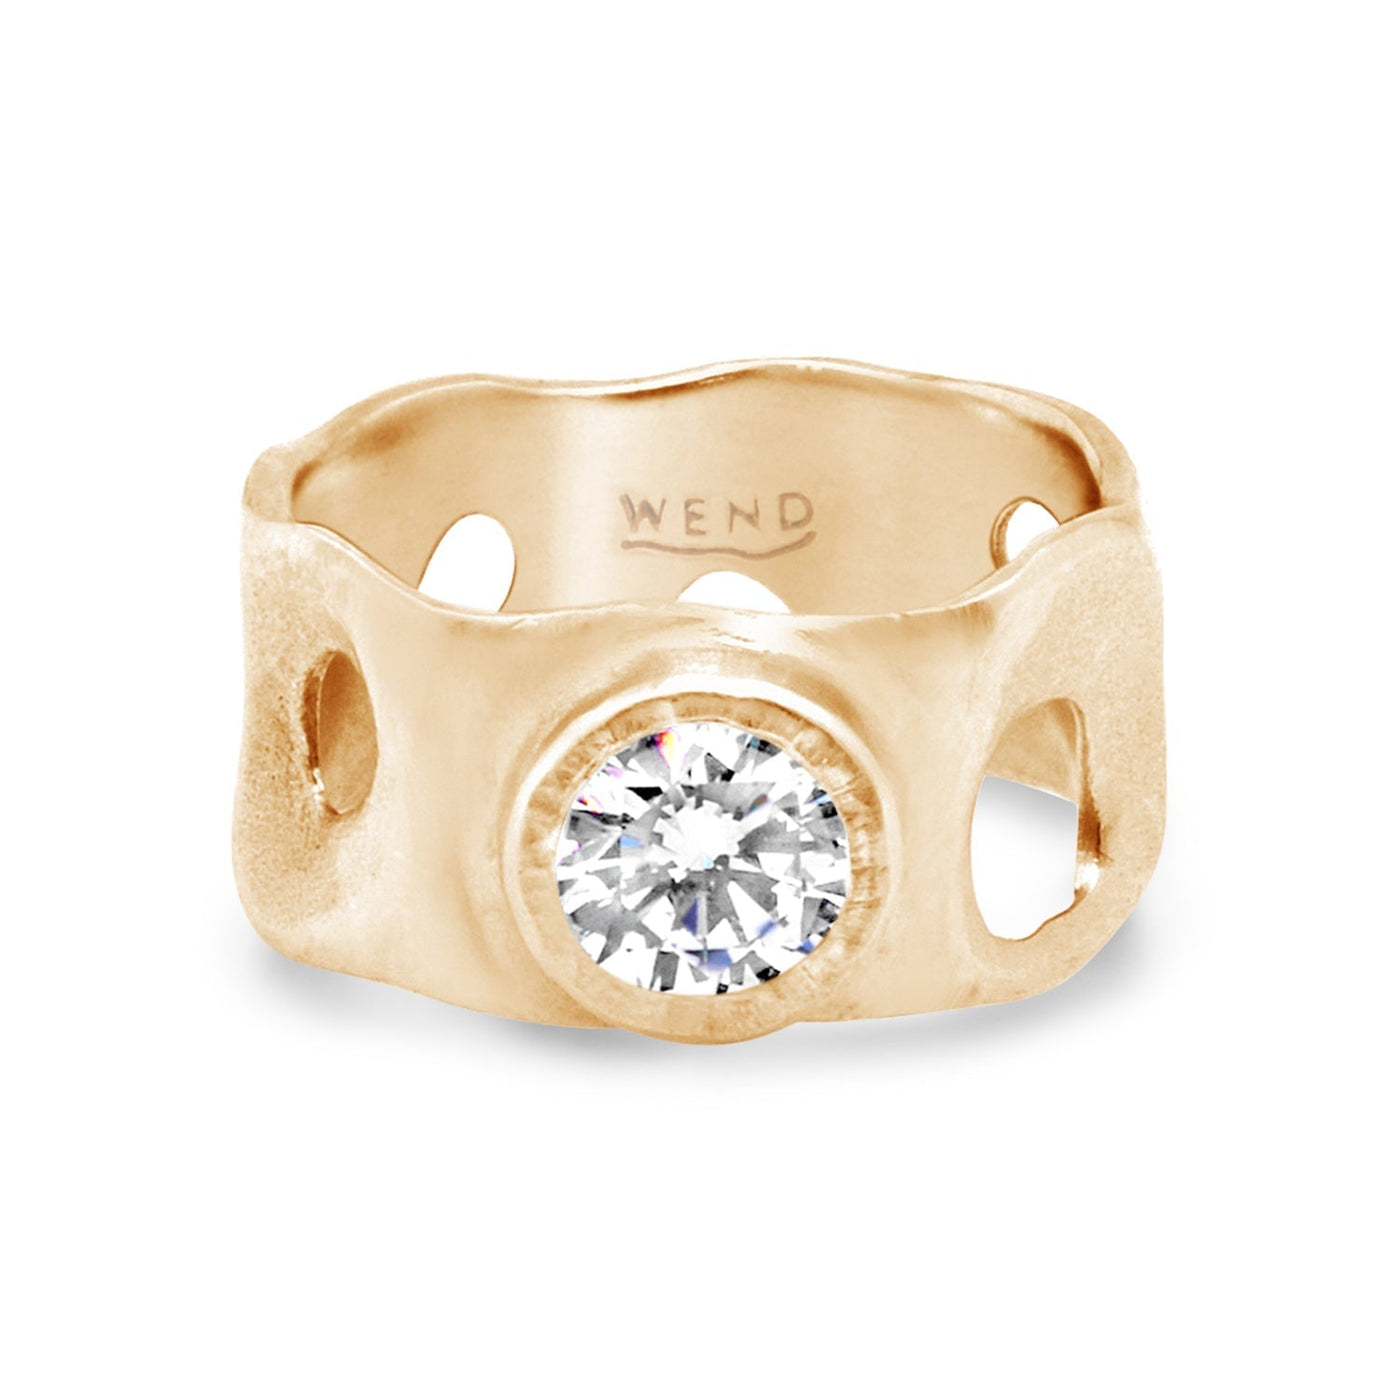 Tidepools ring band inspired by ocean tide pools with lab created diamond in certified recycled gold by WEND Jewelry #gemstone-size_6mm